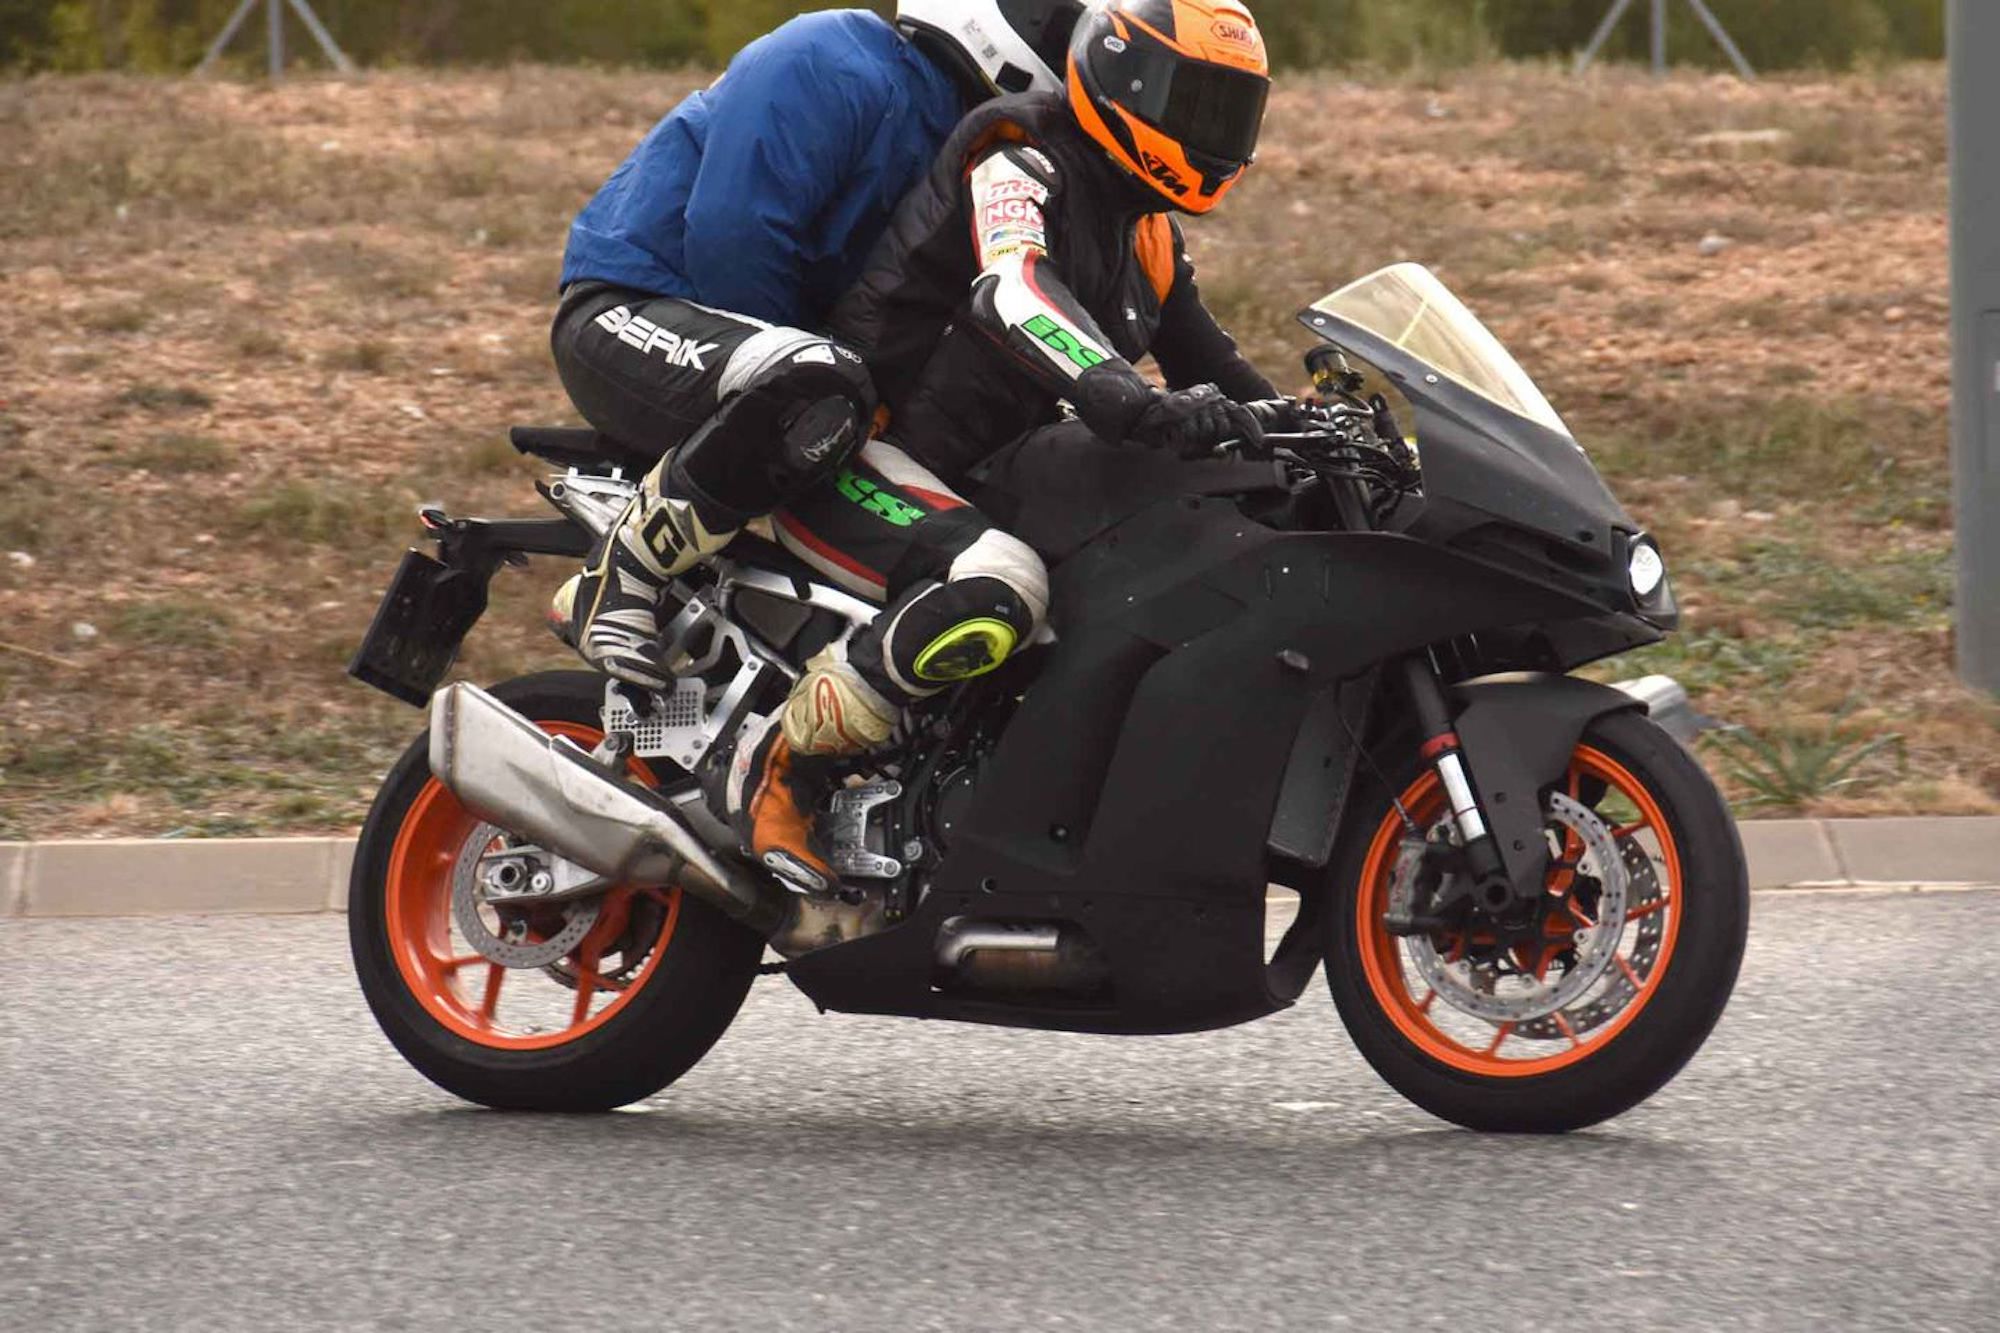 Spy shots showing a larger-displacement KTM bike is on her way! Media sourced from CycleWorld.